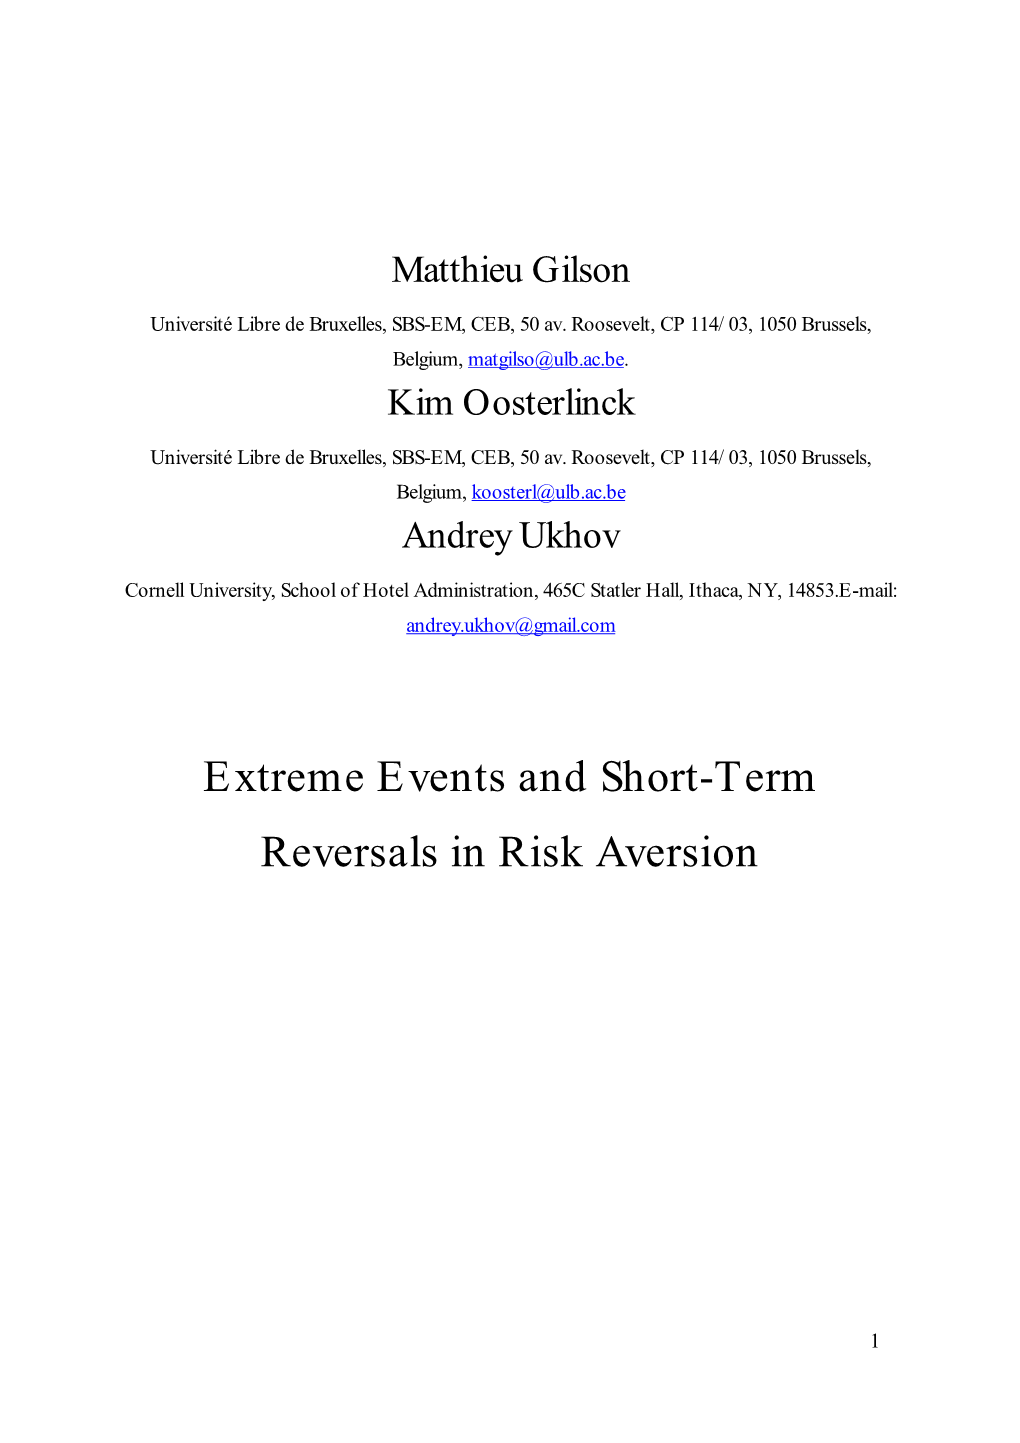 Extreme Events and Short-Term Reversals in Risk Aversion